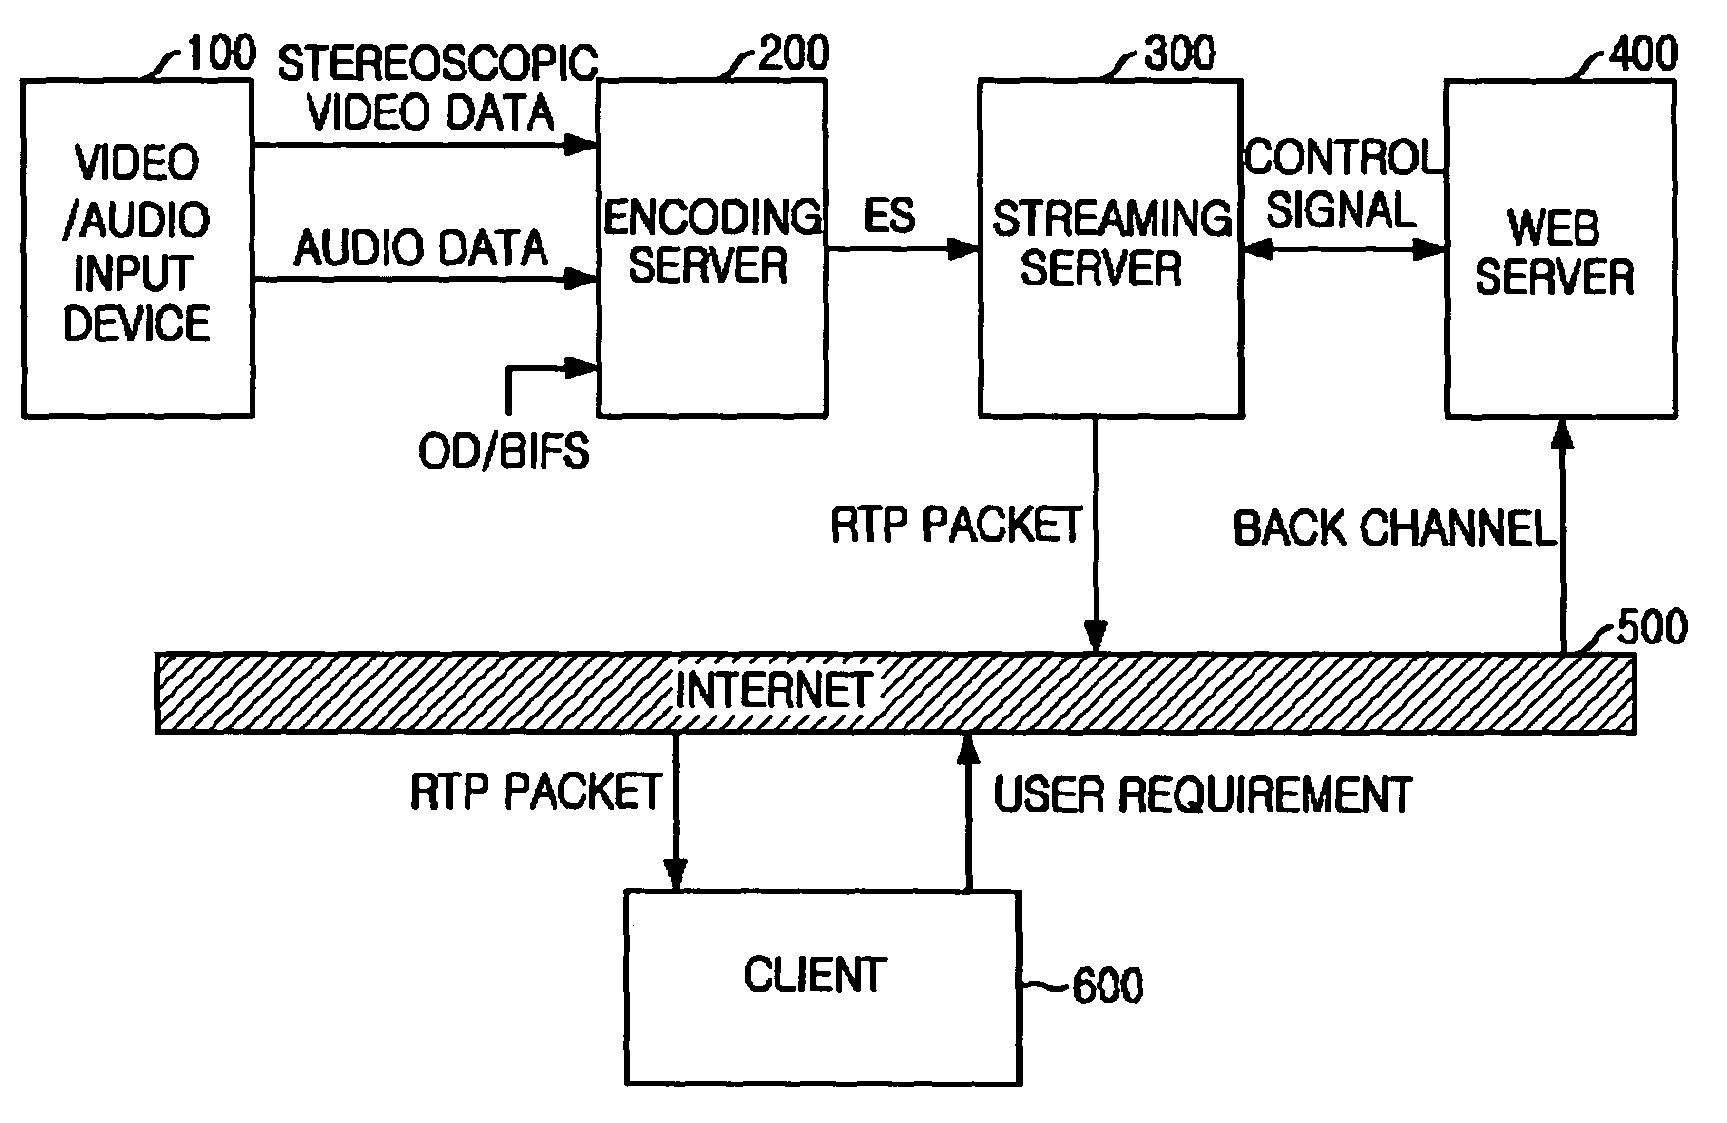 System and method for internet broadcasting of MPEG-4-based stereoscopic video